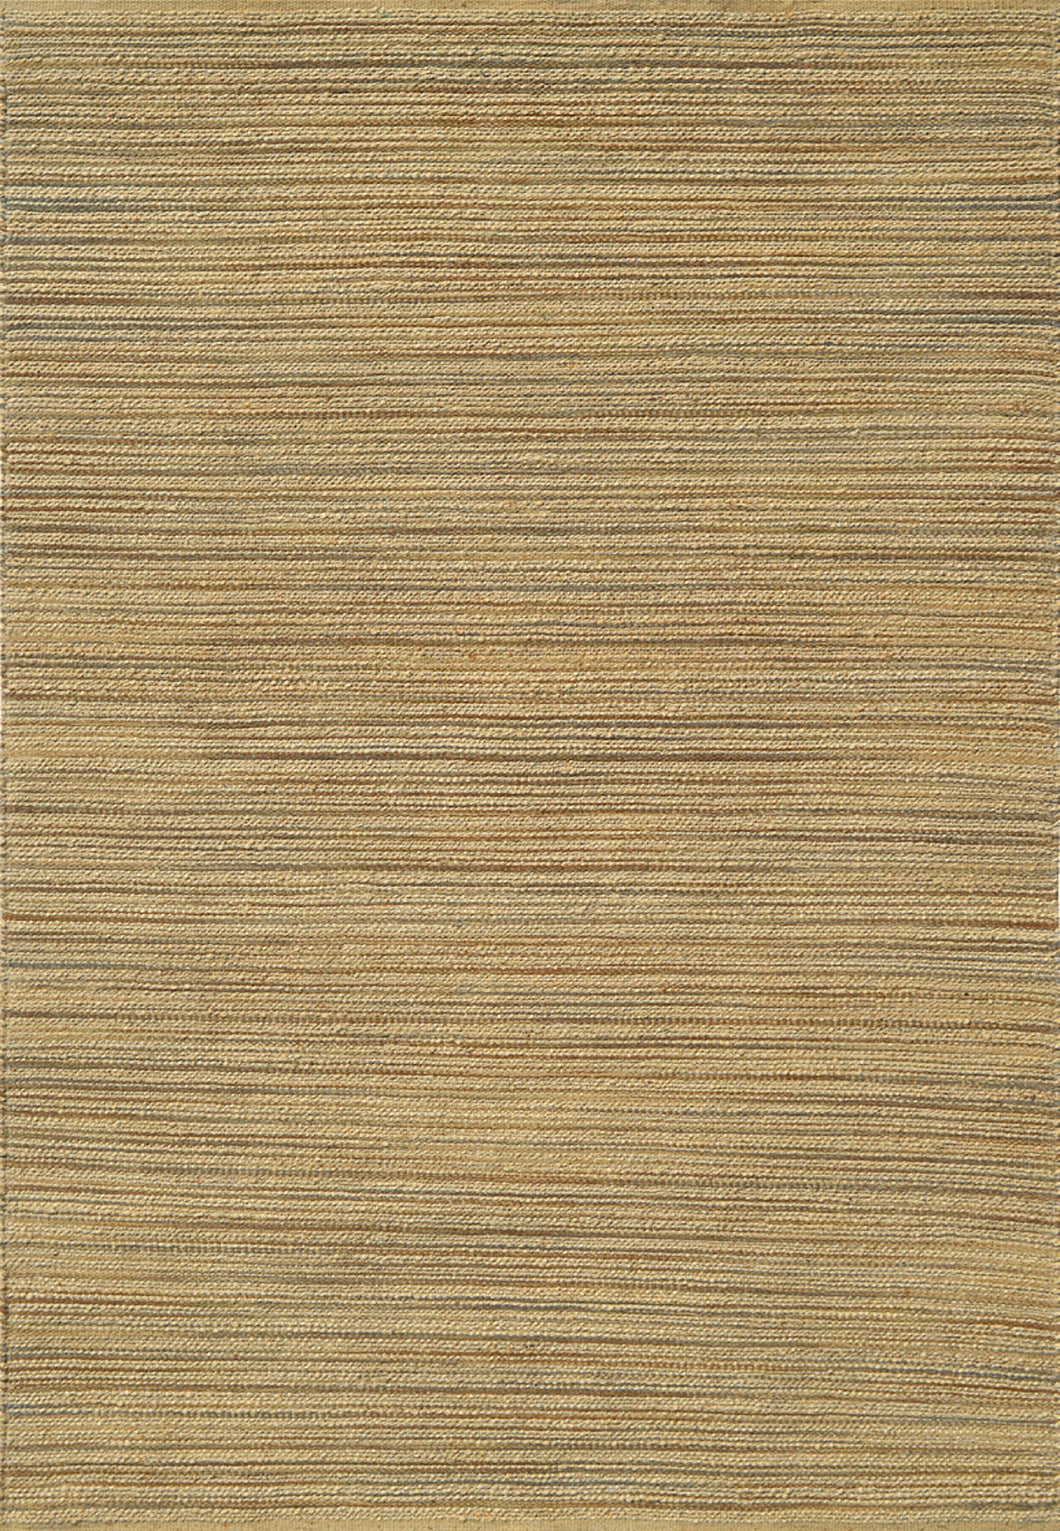 Dynamic Rugs Shay 9425-880 Natural/Taupe Area Rug